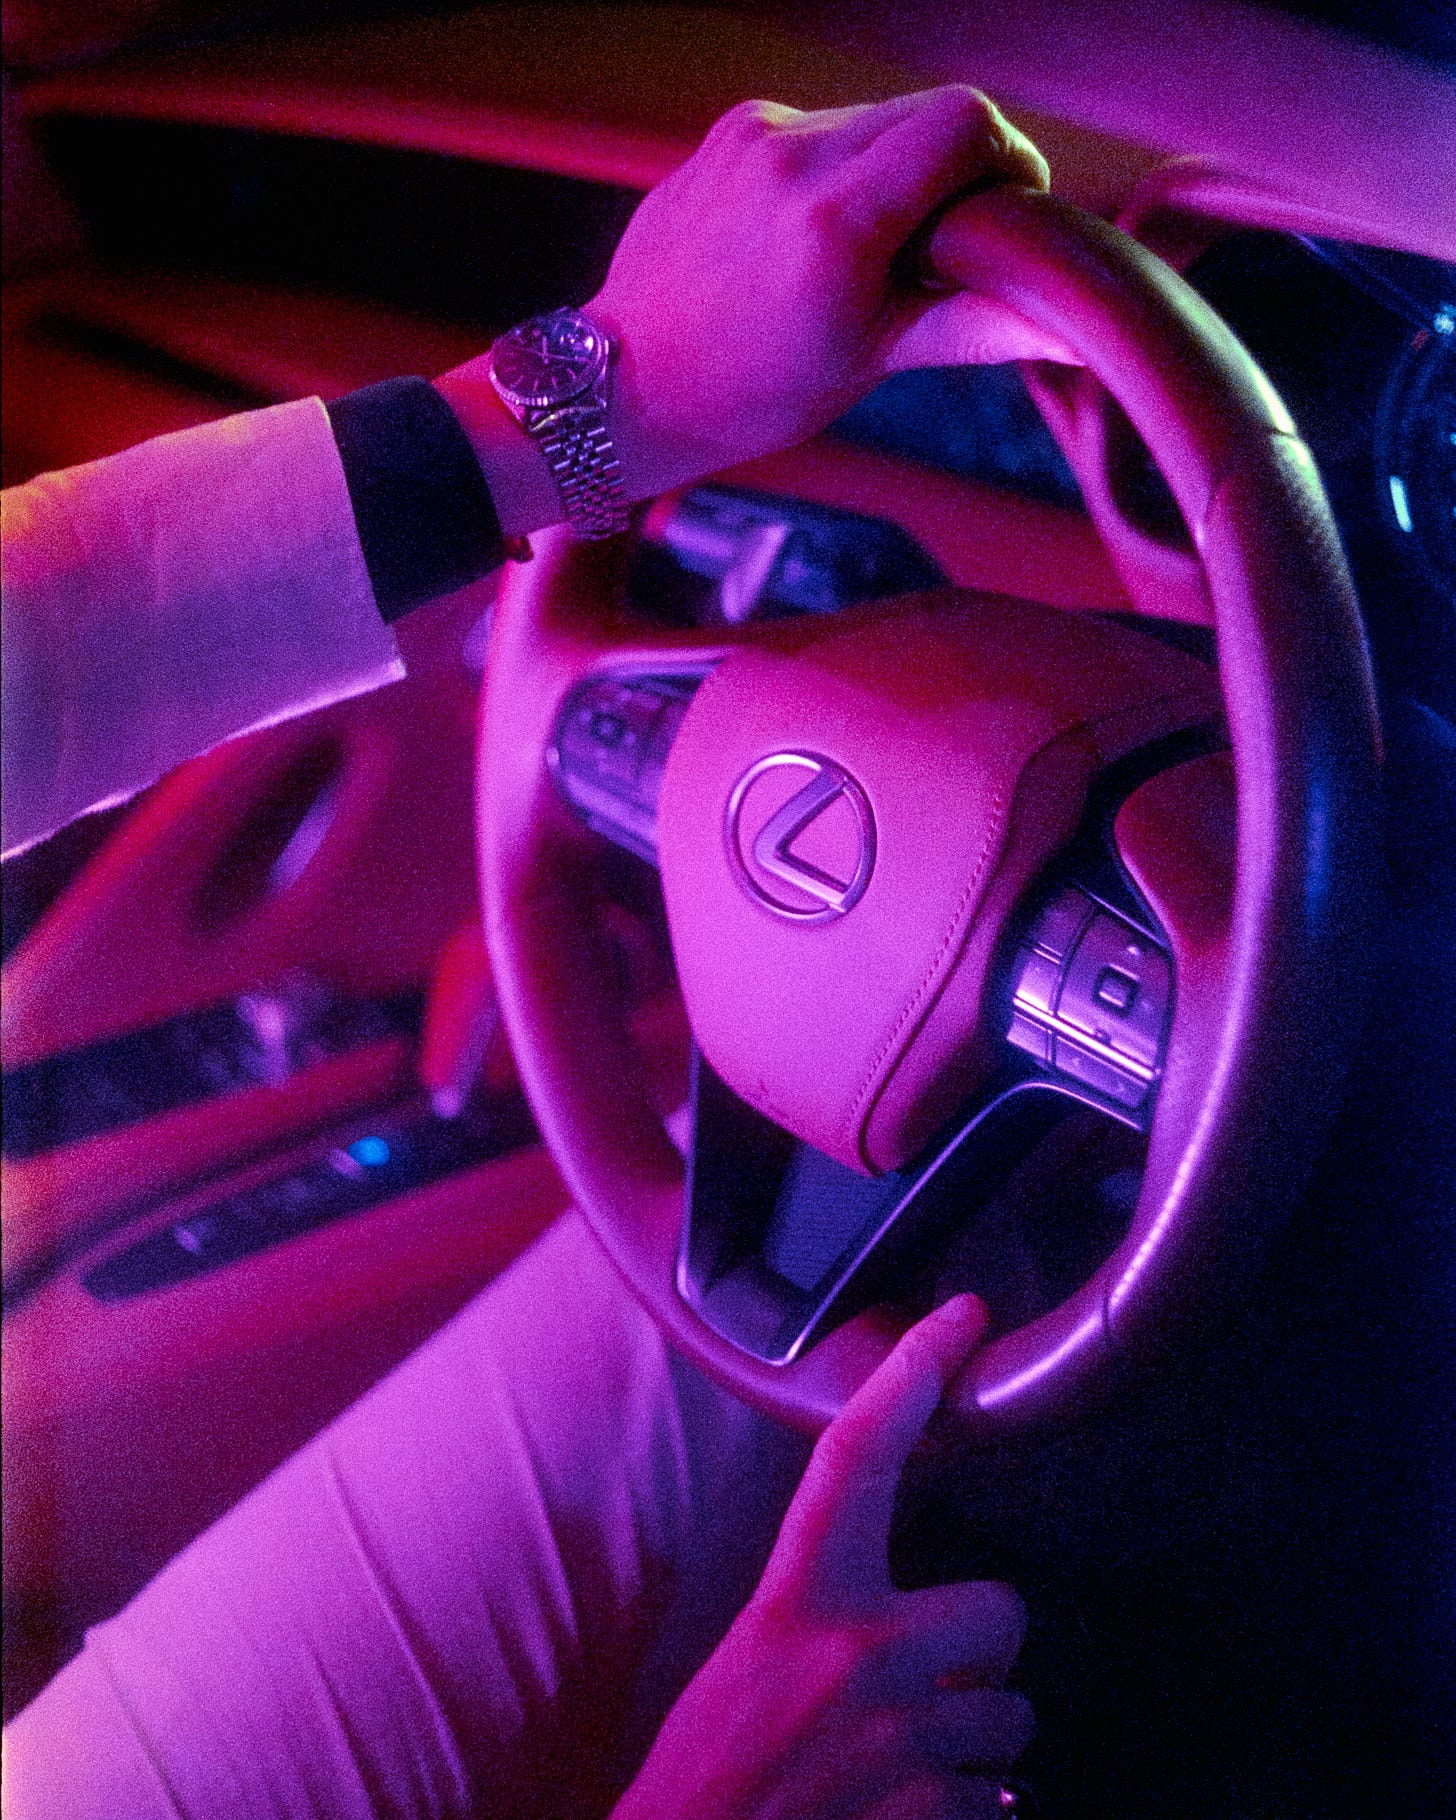 The finalized image, colour corrected and white balanced perfectly. A close up shot of the steering wheel and Clem's hands illuminated by purple light